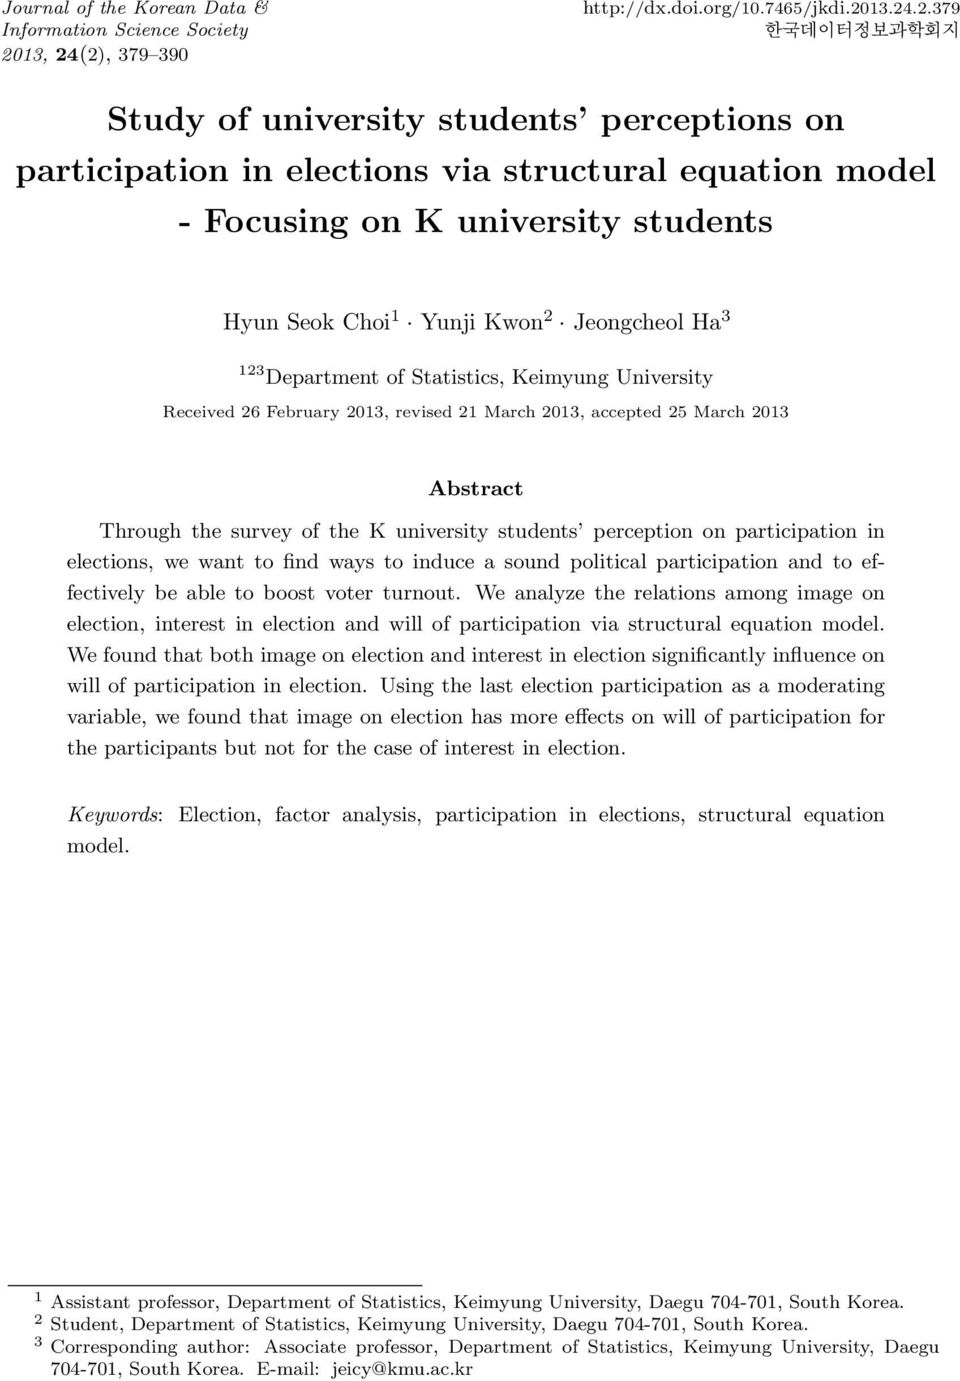 (2), 379 390 http://dx.doi.org/10.7465/jkdi.2013.24.2.379 한국데이터정보과학회지 Study of university students perceptions on participation in elections via structural equation model - Focusing on K university